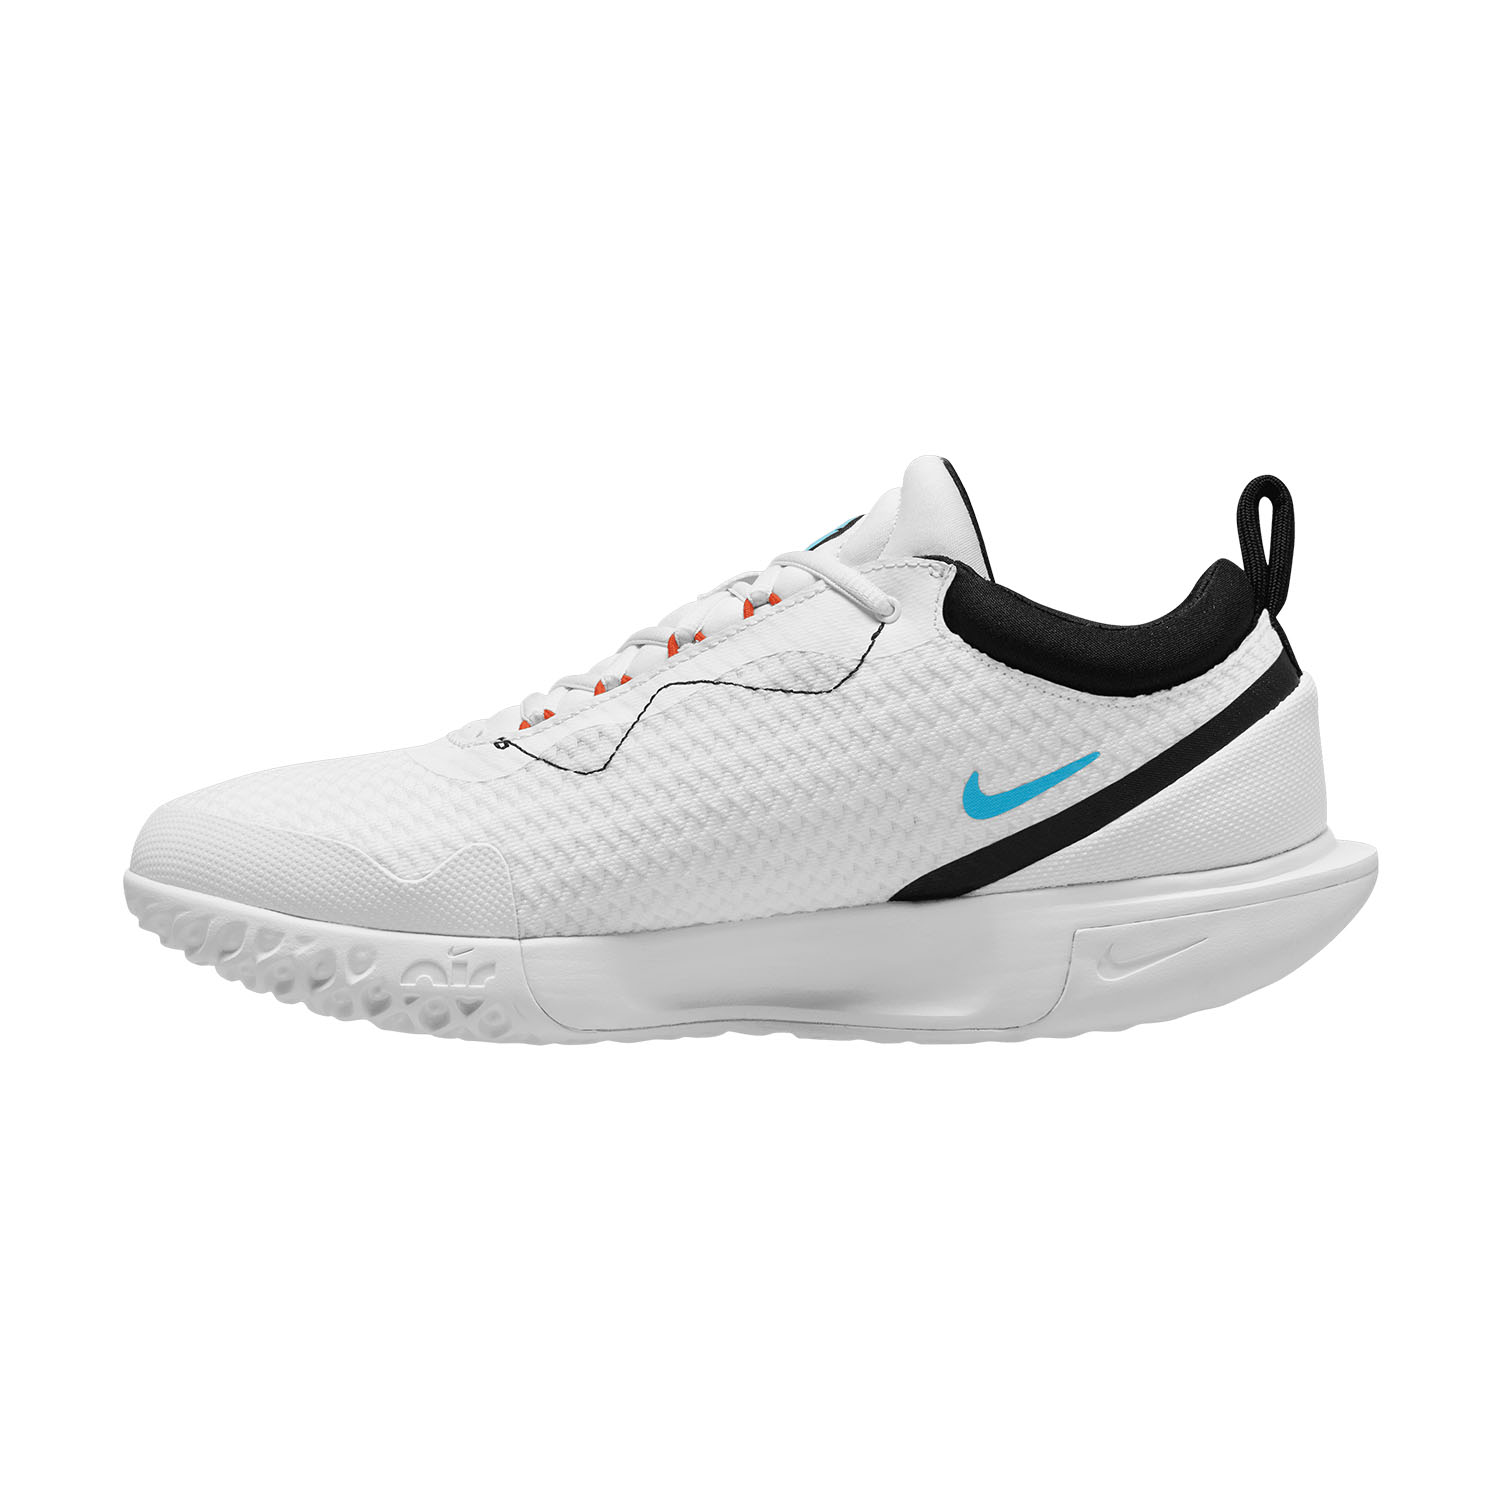 Nike Court Zoom Pro HC - White/Black/Baltic Blue/Picante Red